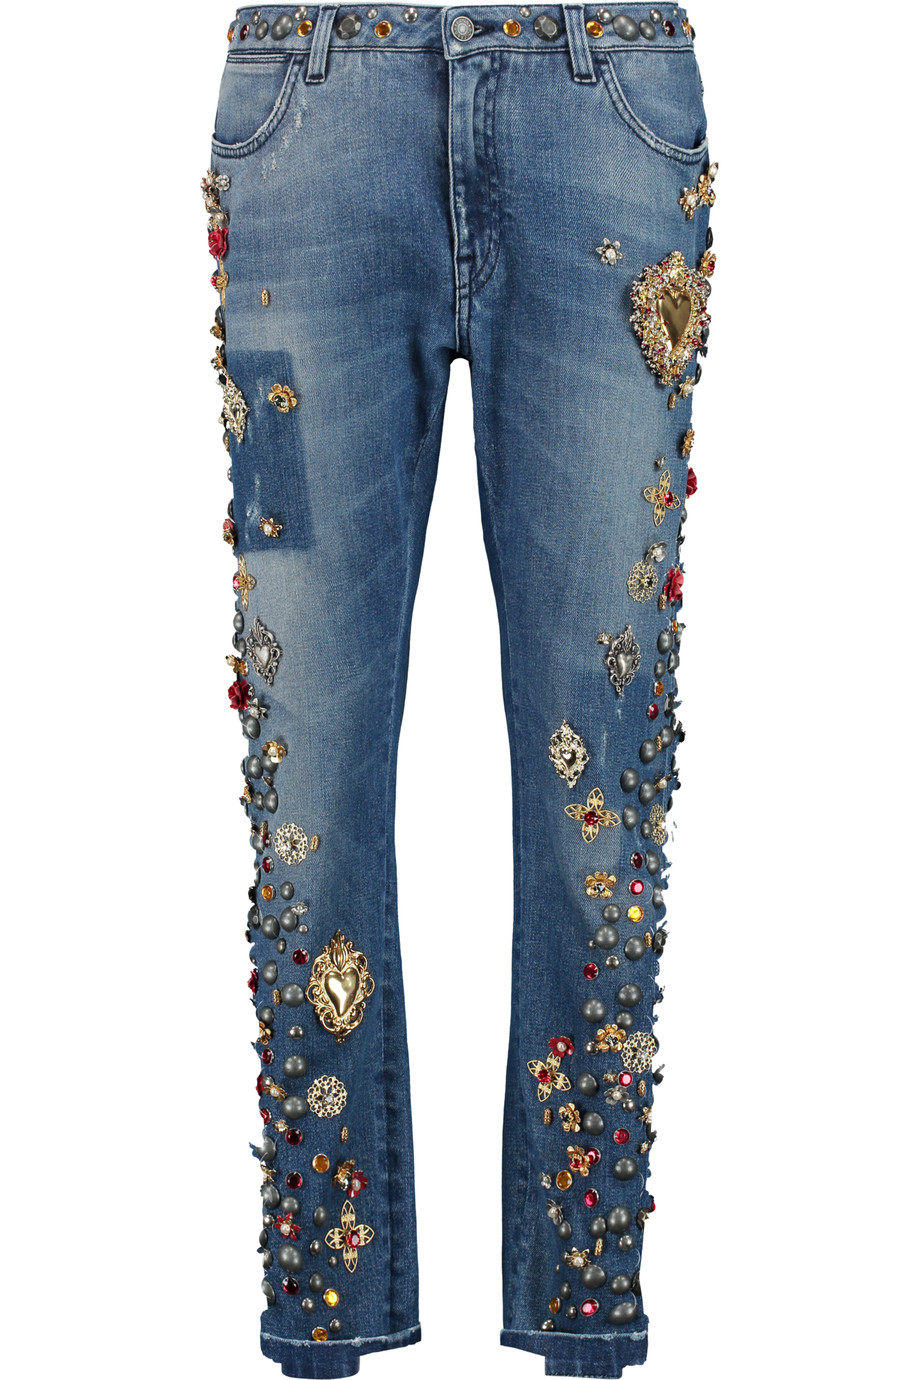 Dolce & Gabbana Embellished Low Rise Straight Leg Jeans